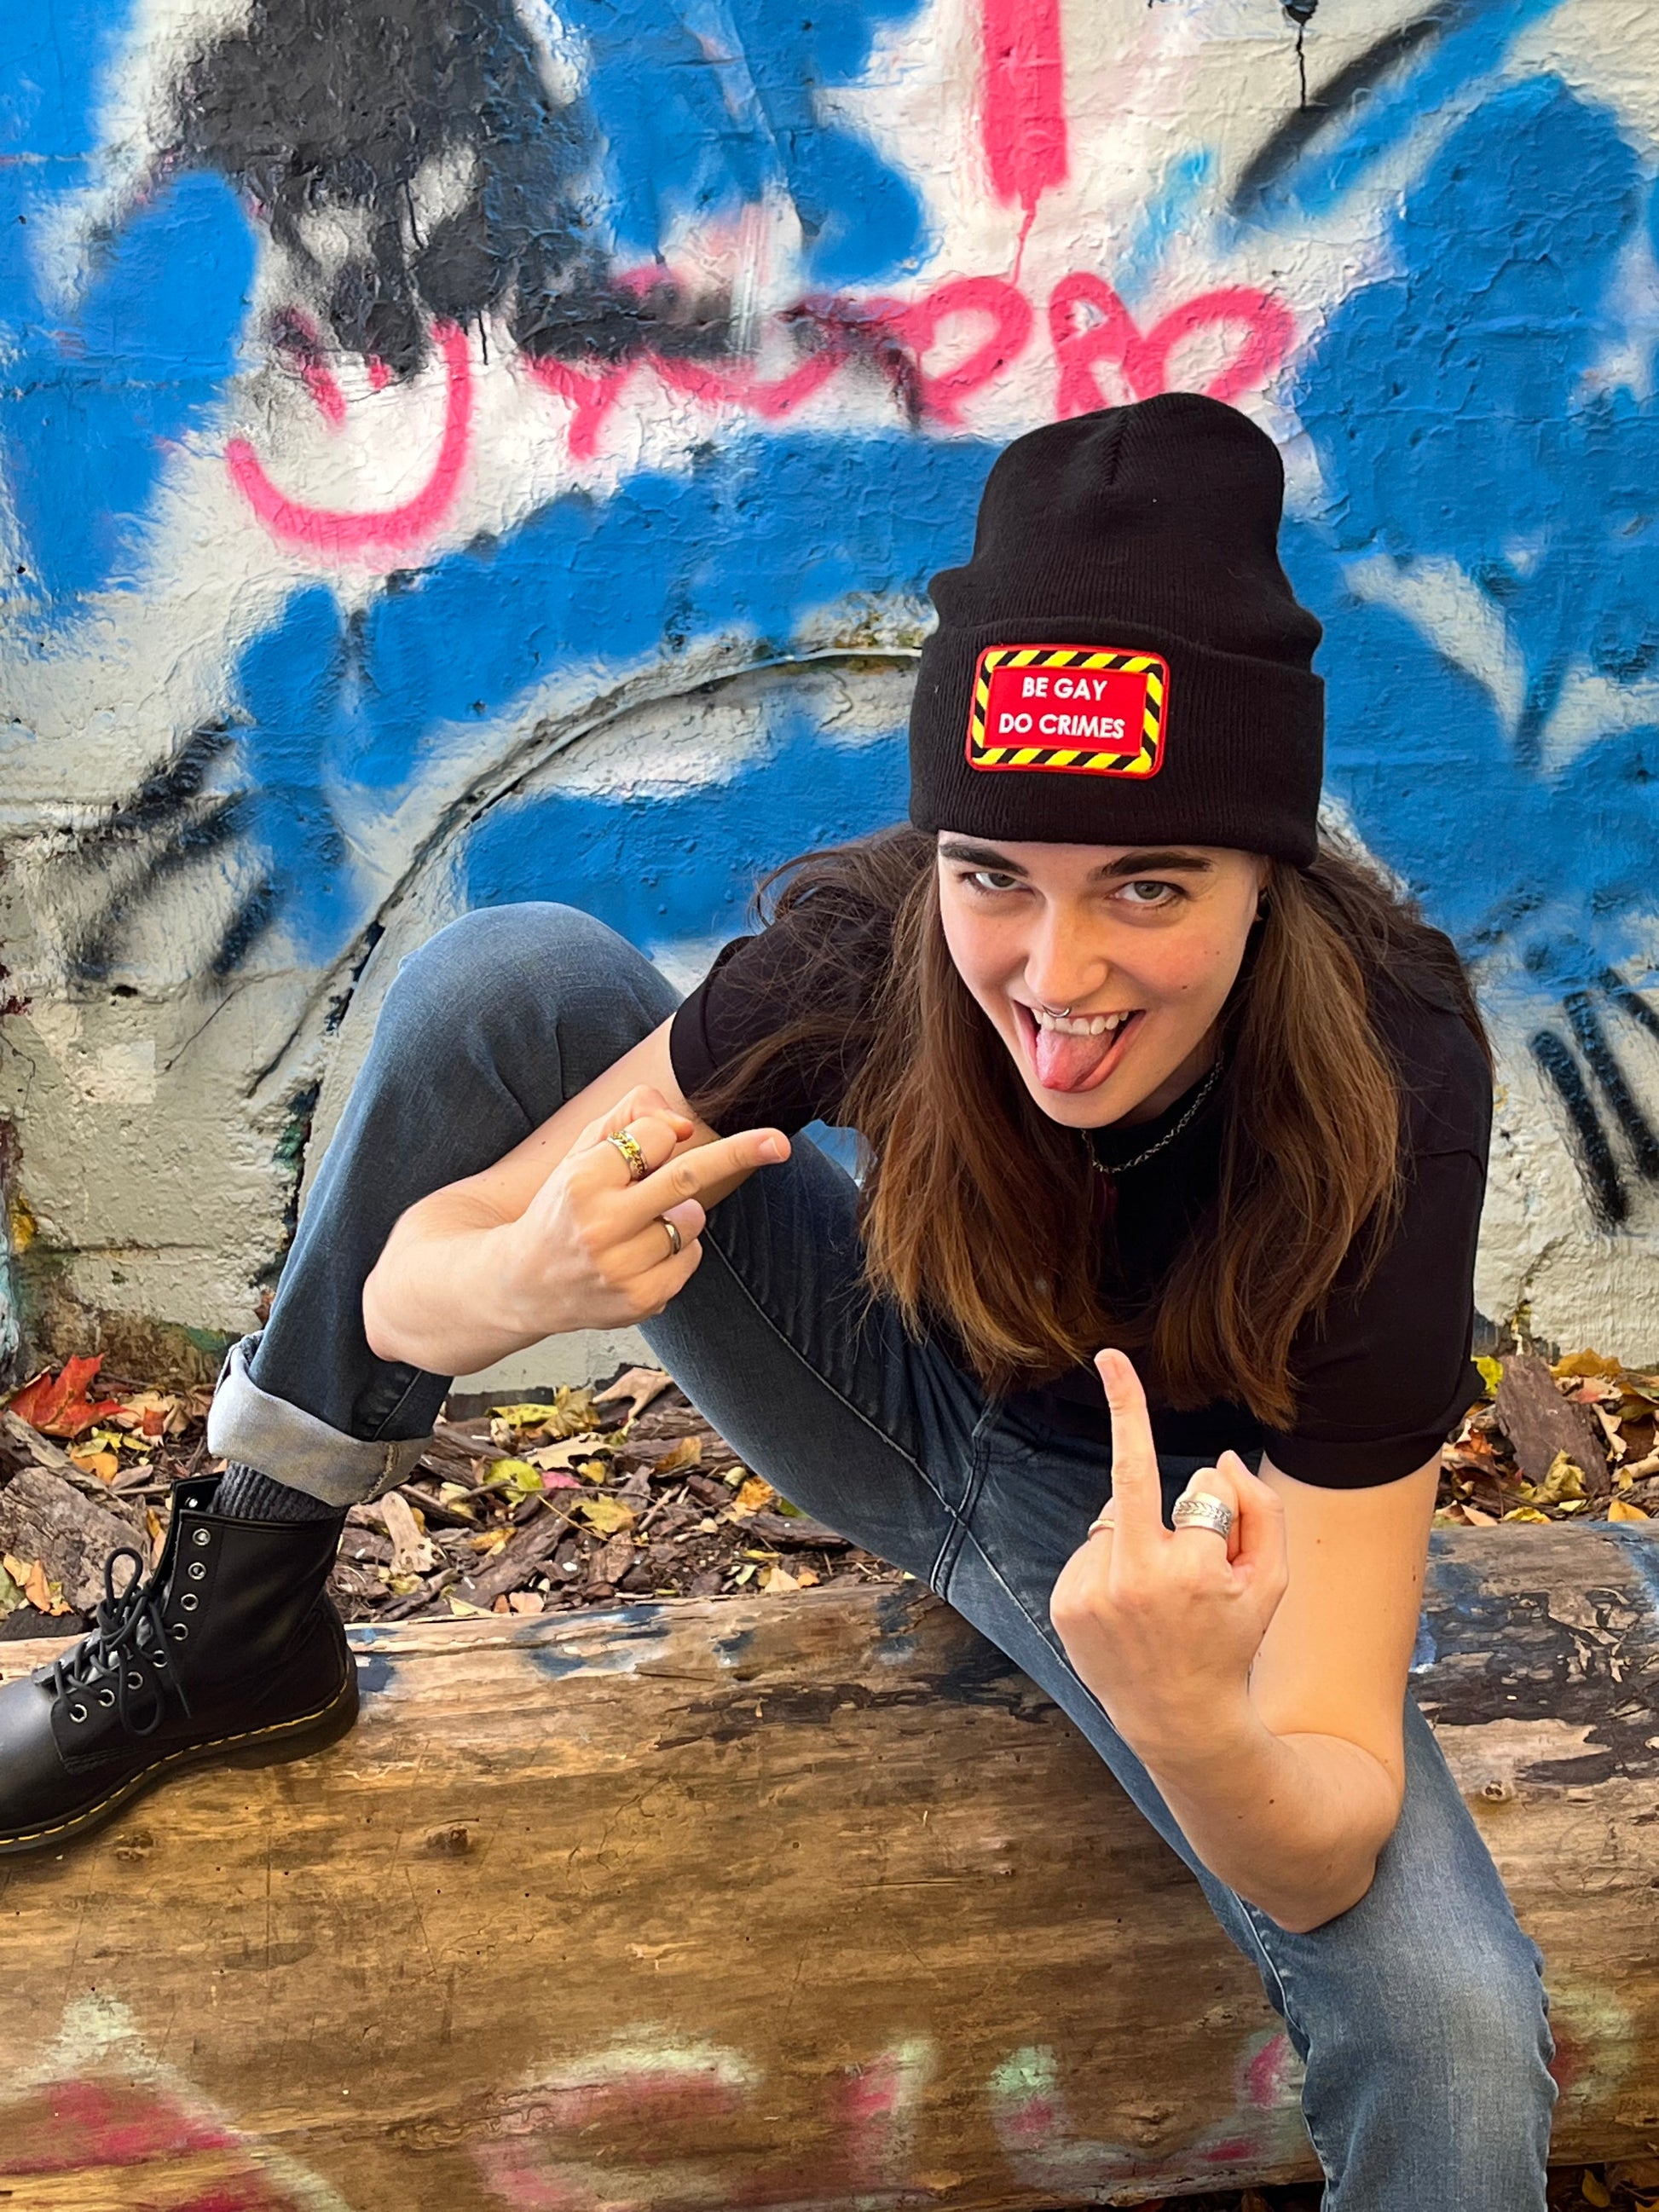 person squatting on a log in front of graffiti flipping off the camera with tongue sticking out wearing the black "be gay do crimes" beanie